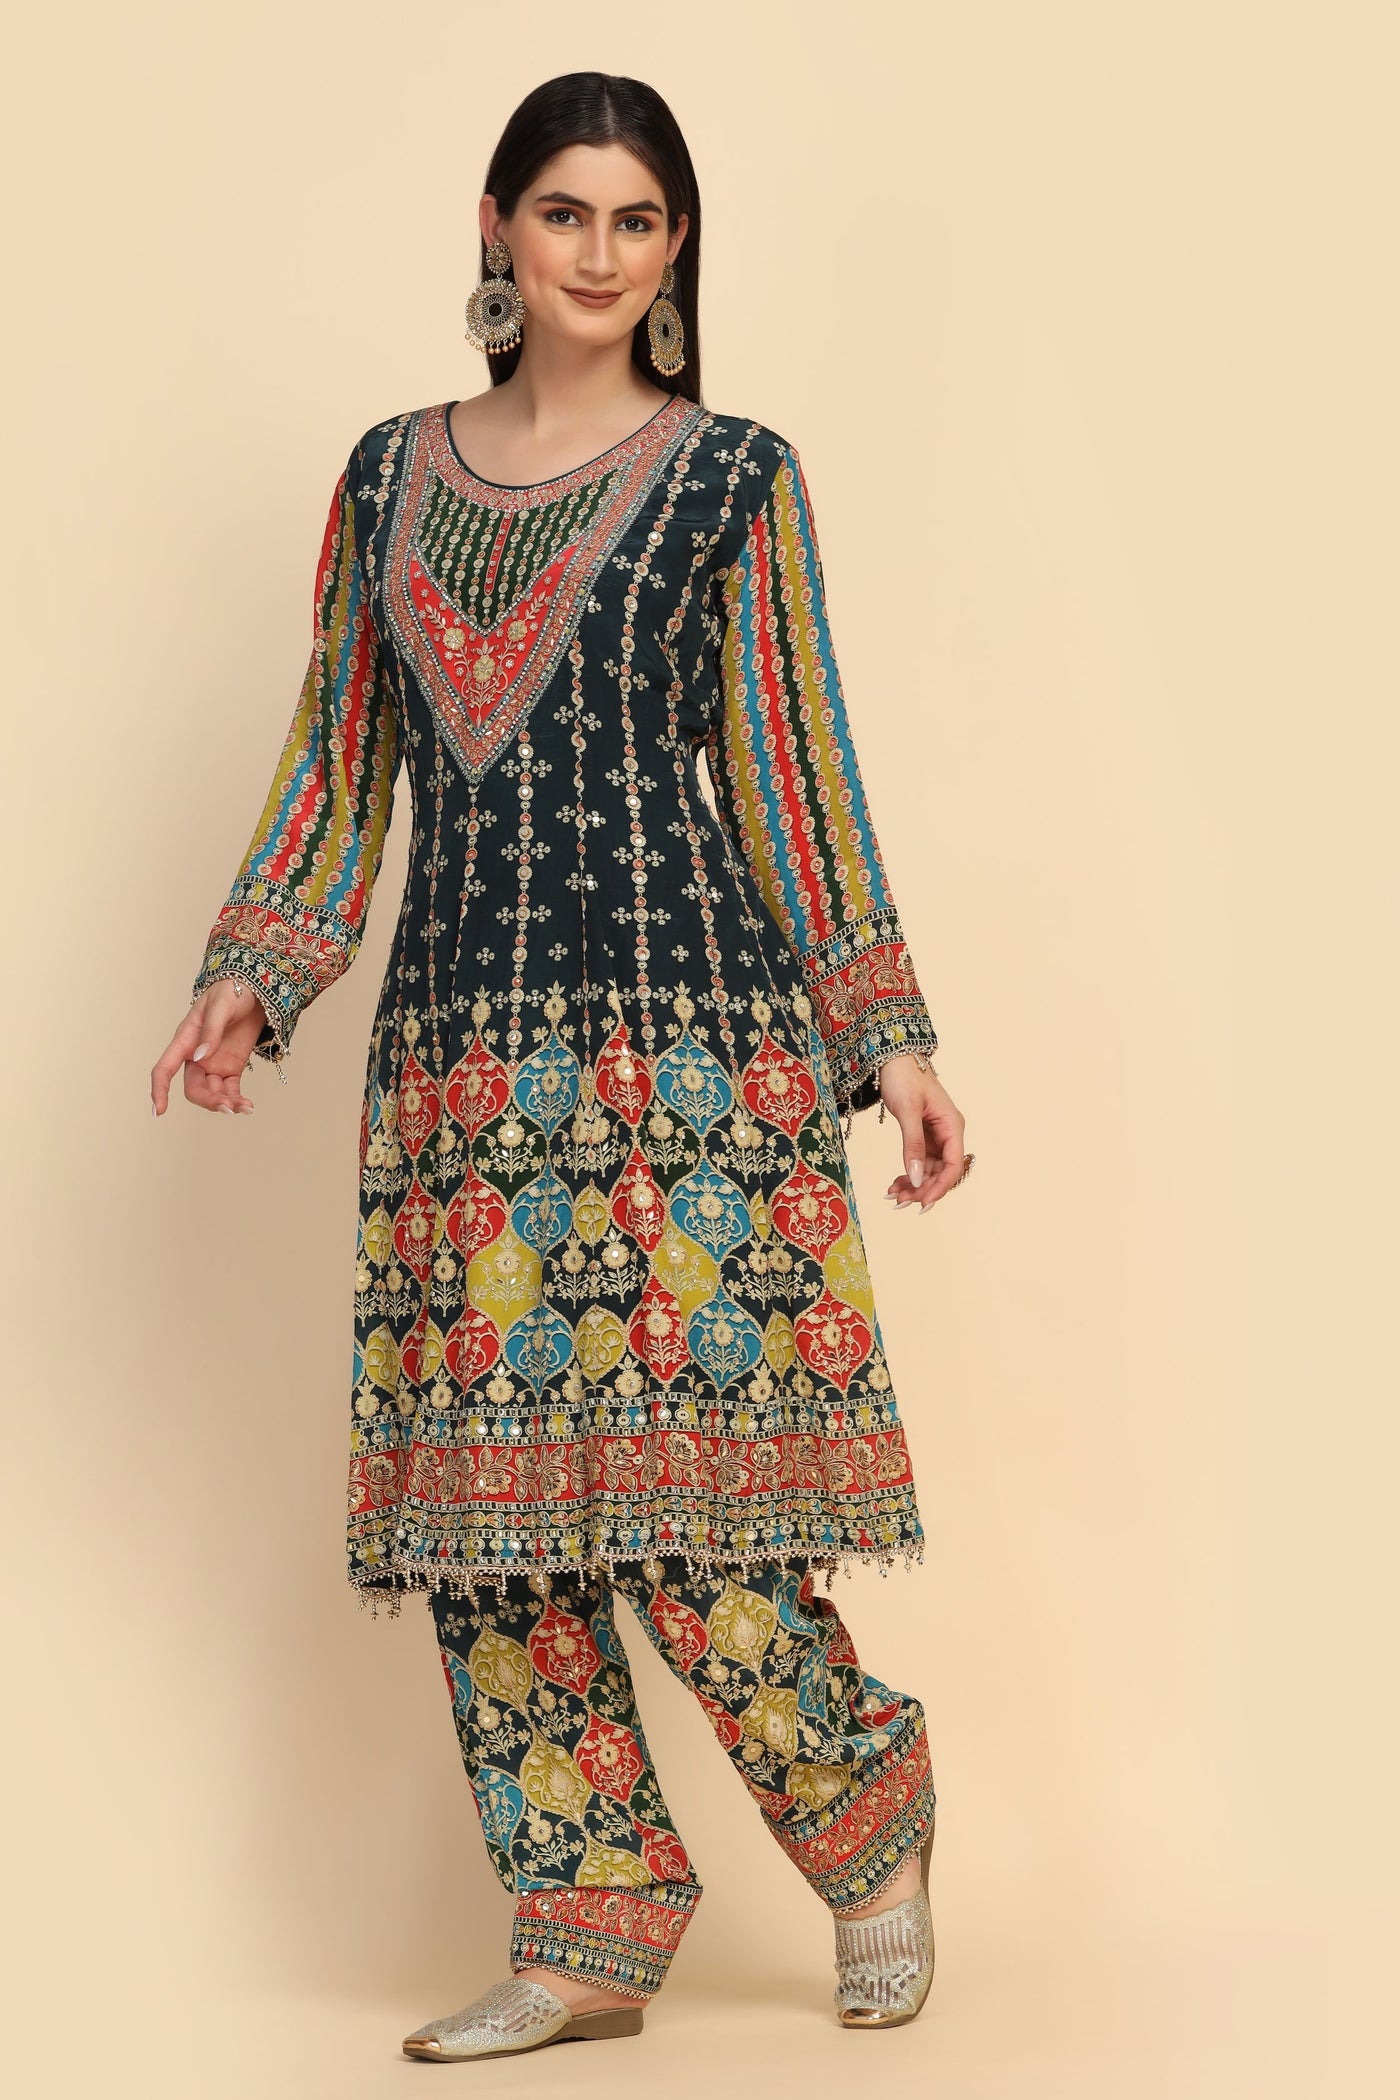 girl wearing a multi color floral motif embroidered suit